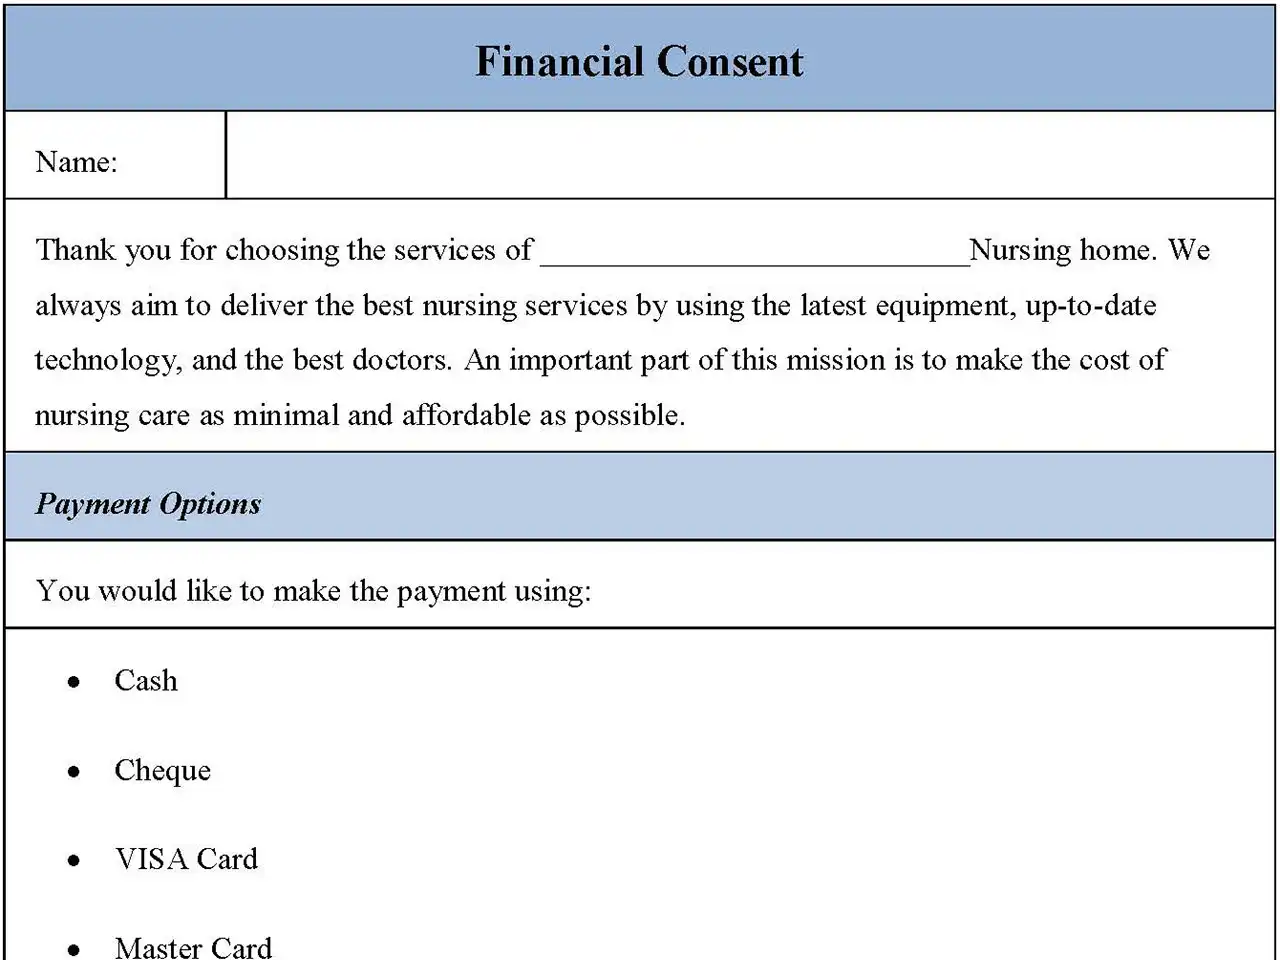 Financial Consent Form